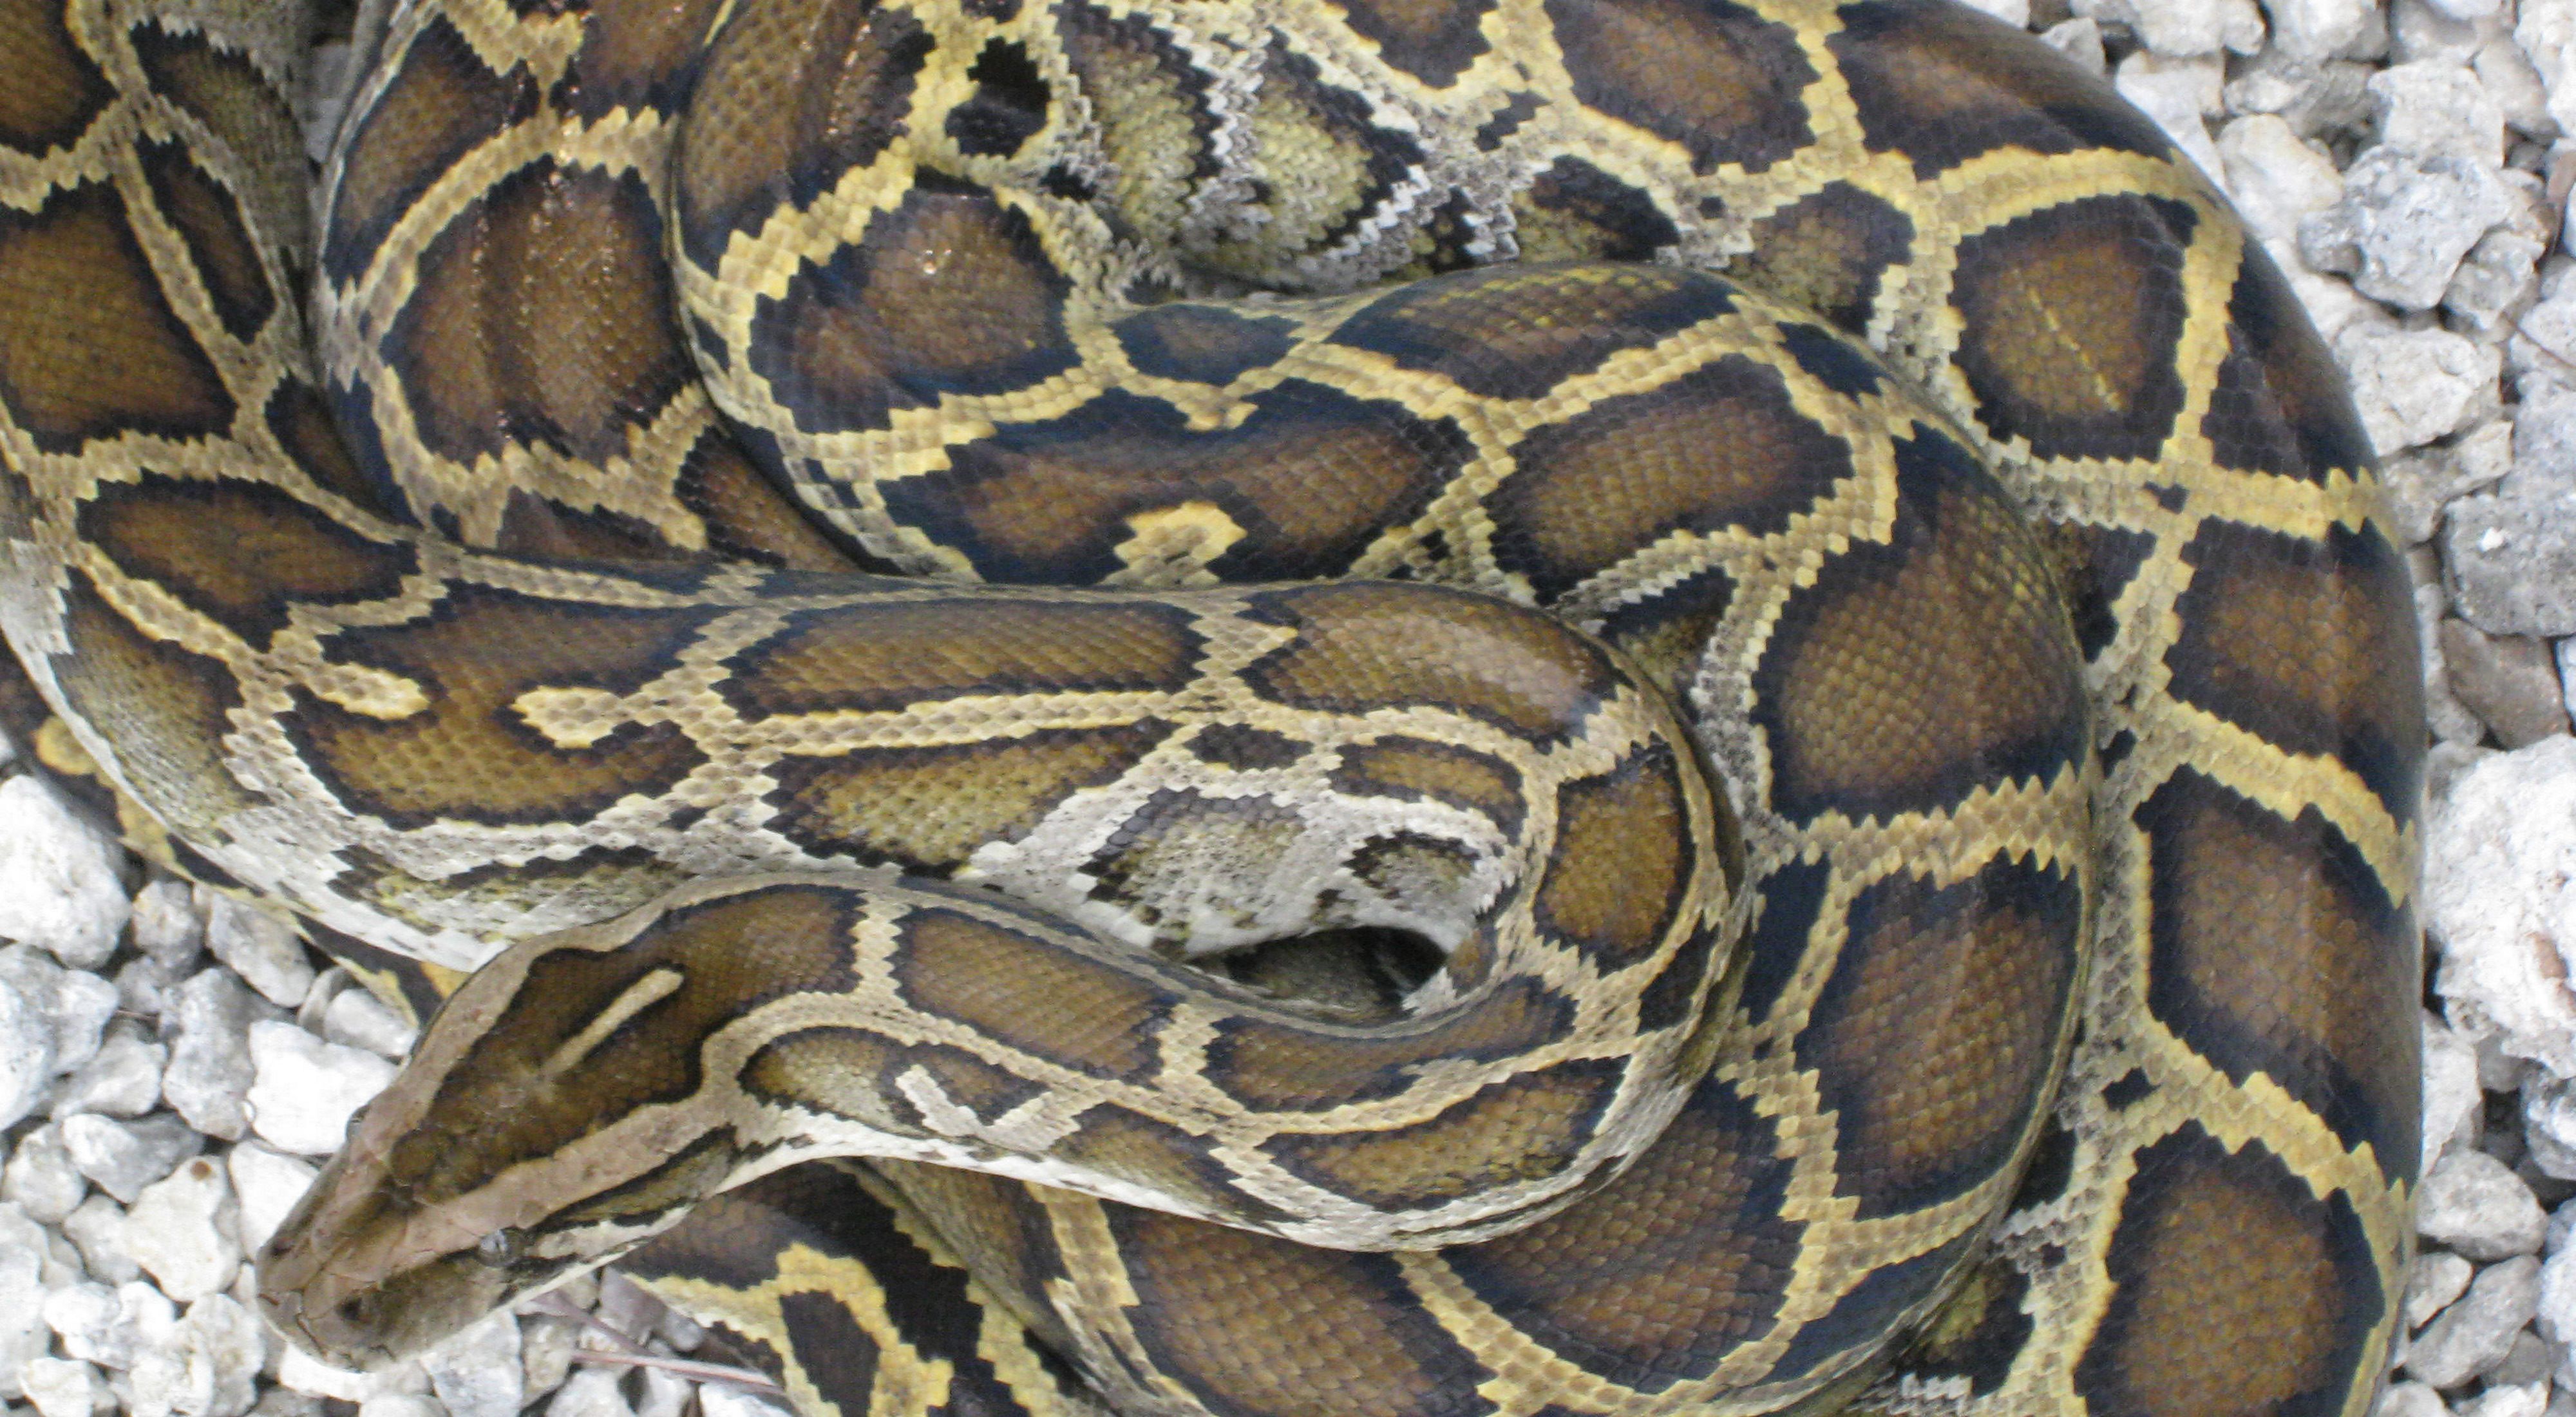 A close look at a coiled Burmese python snake showing dark brown and gold scales.